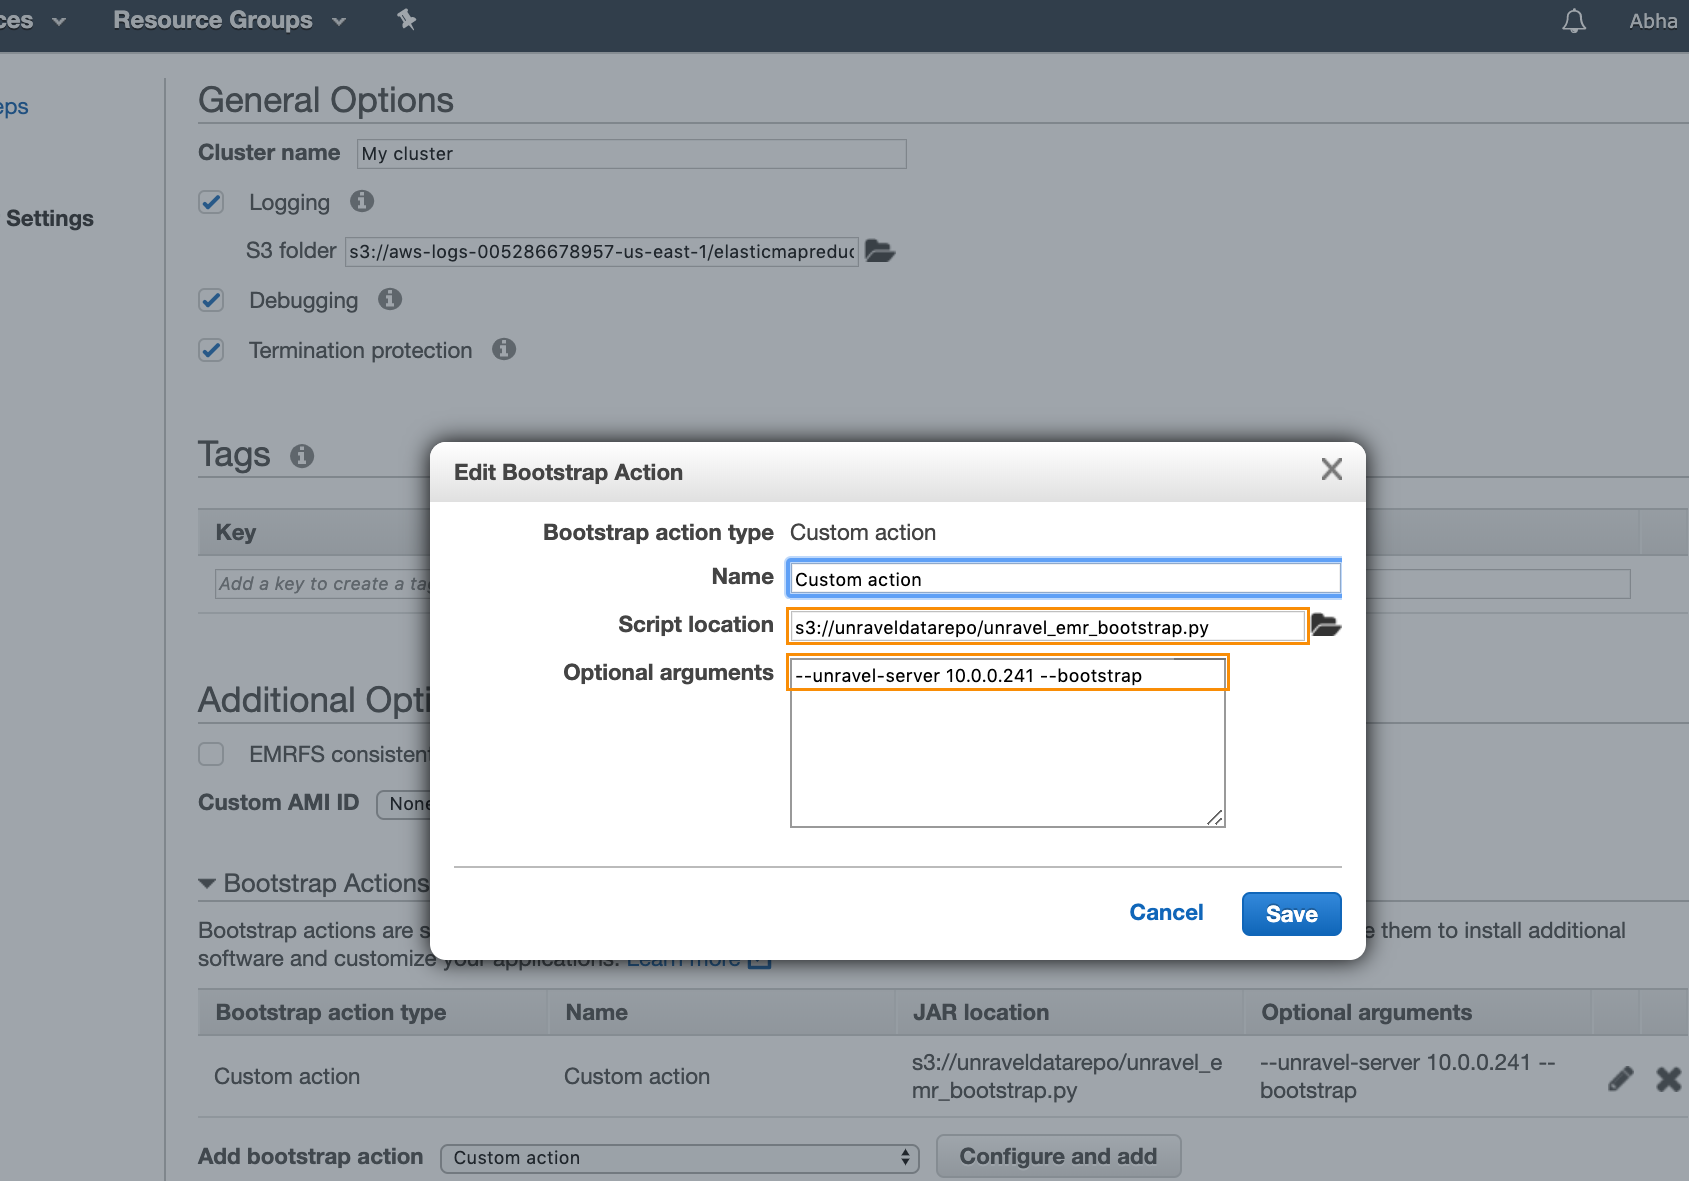 aws-marketplace-step2a-create-cluster-add-bootstrap4.png